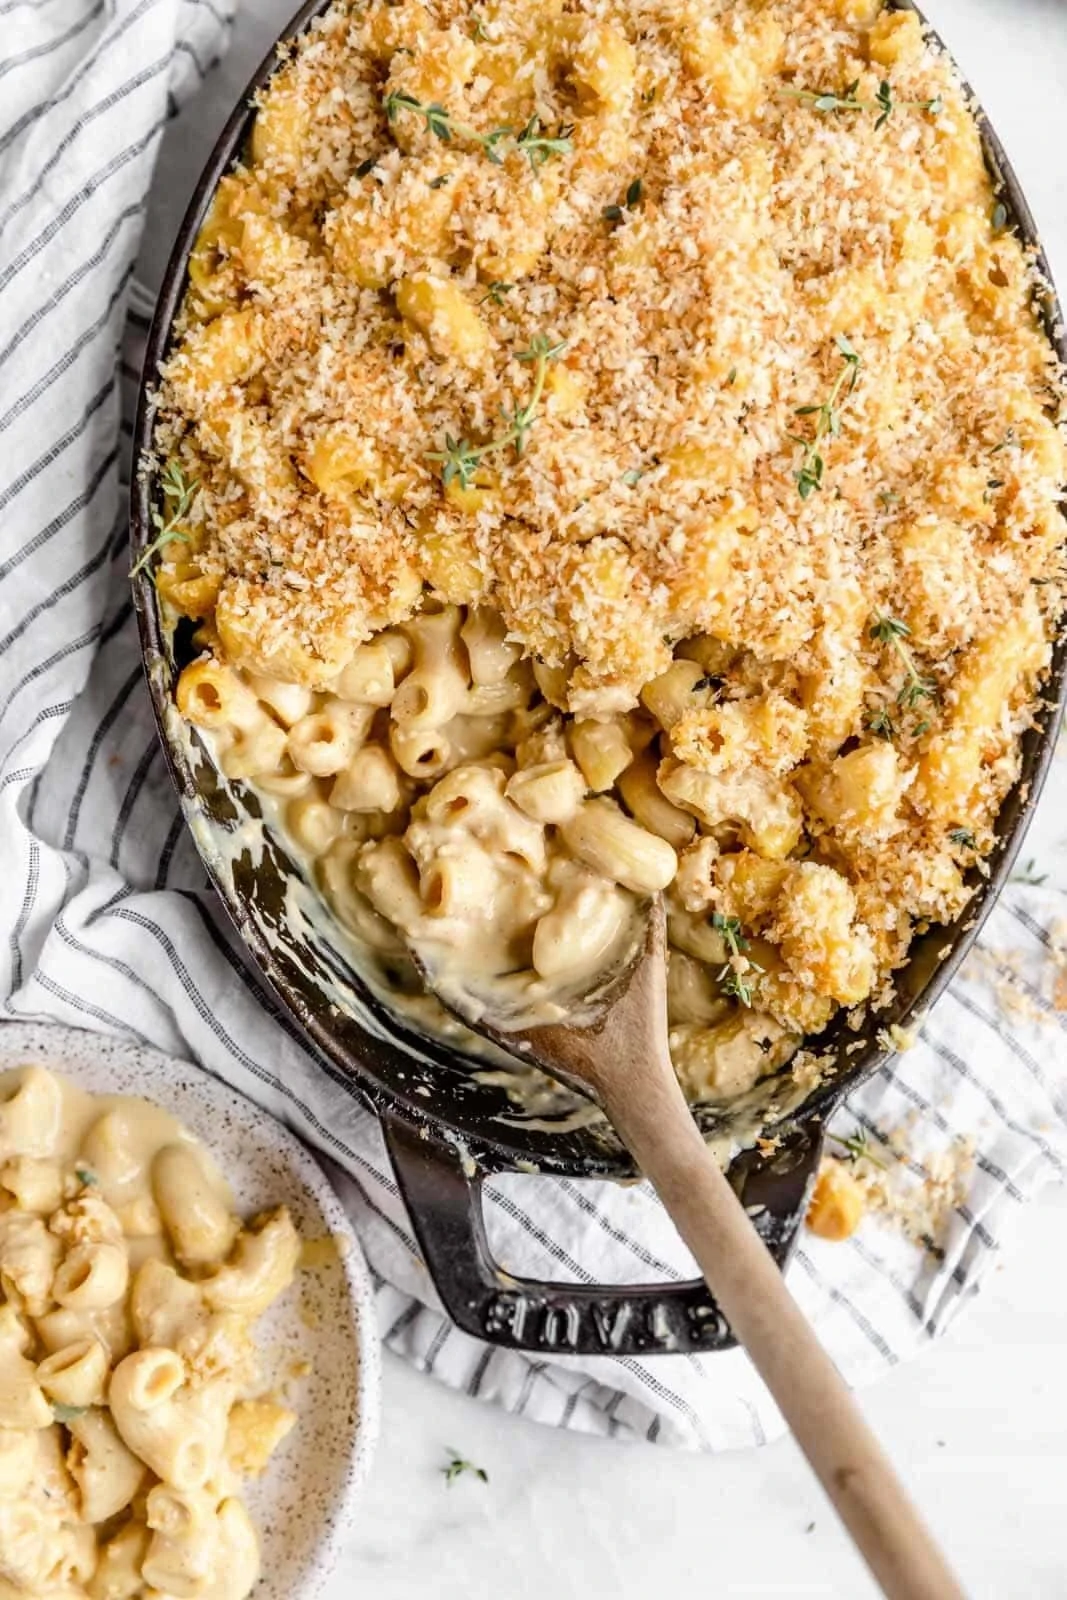 An epic Vegan Mac and Cheese that will have even the most discerning meat eaters will go crazy for! Made with a creamy cashew cheese sauce. 